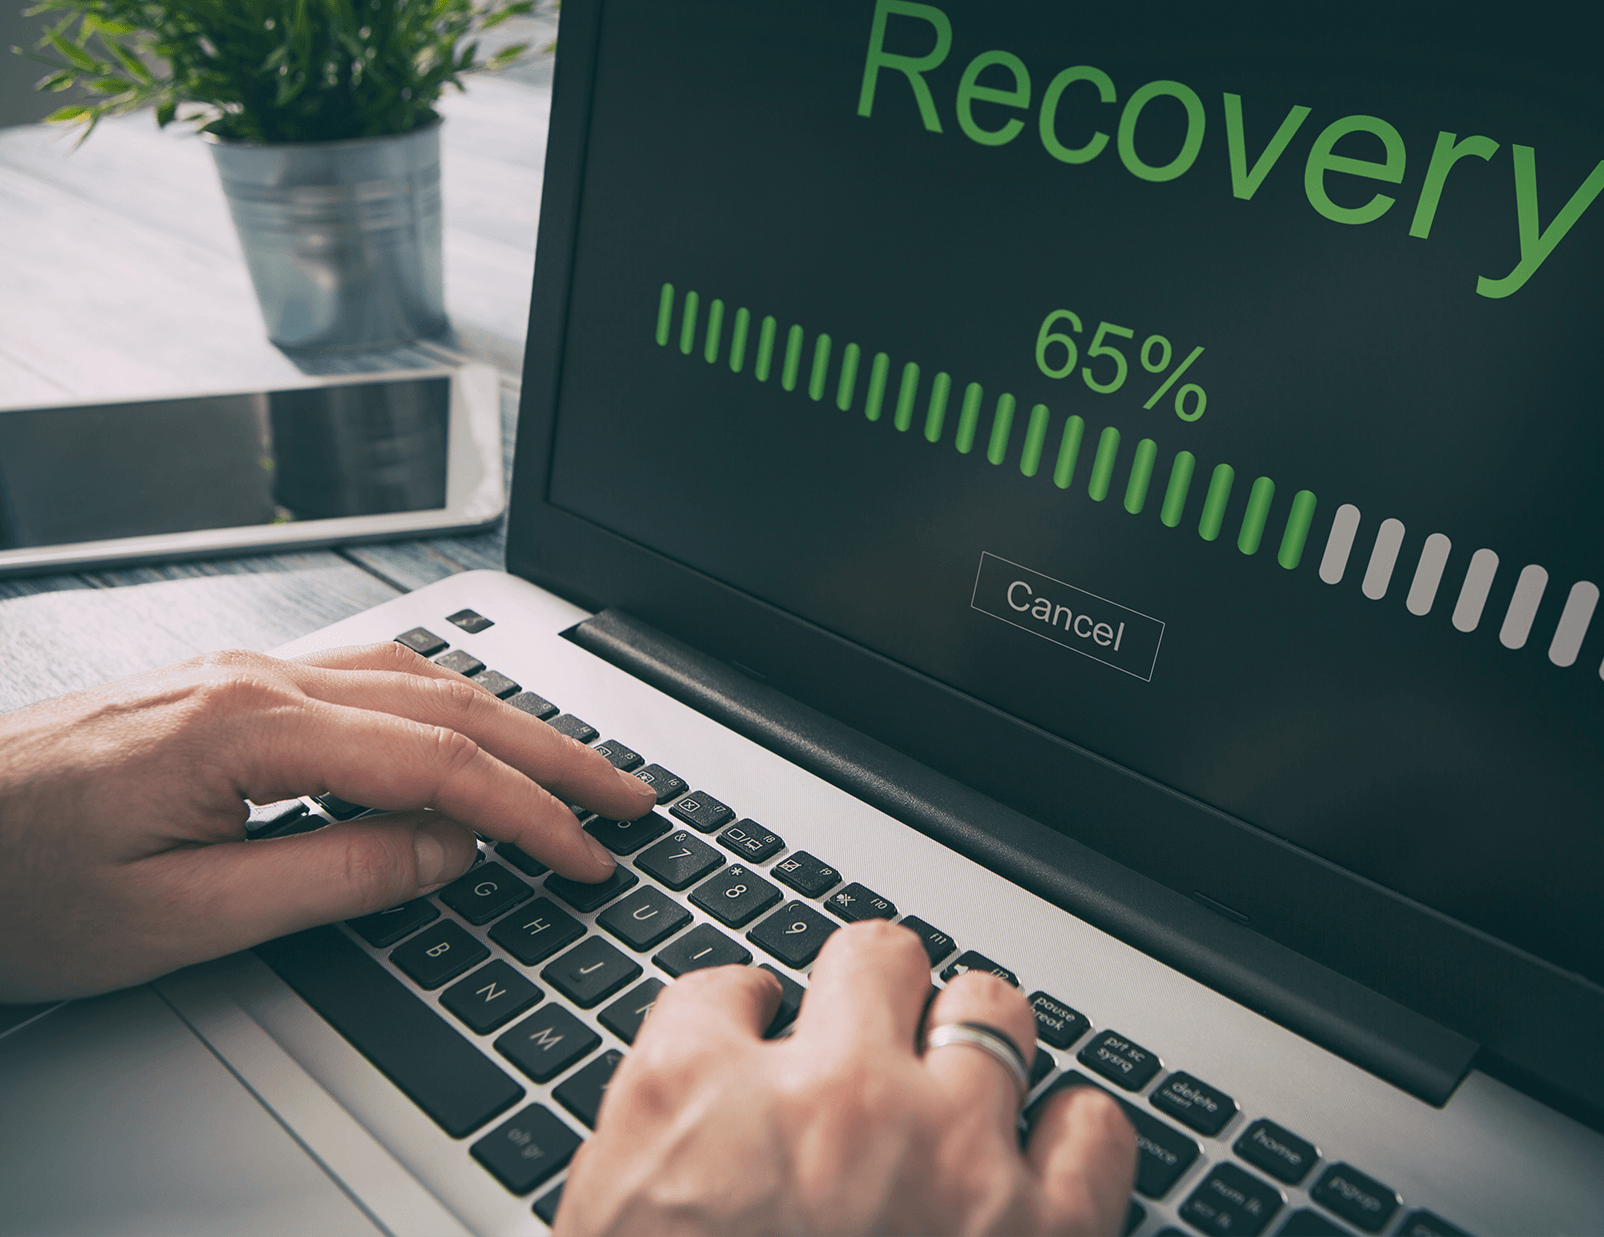 cloud recovery program running on computer